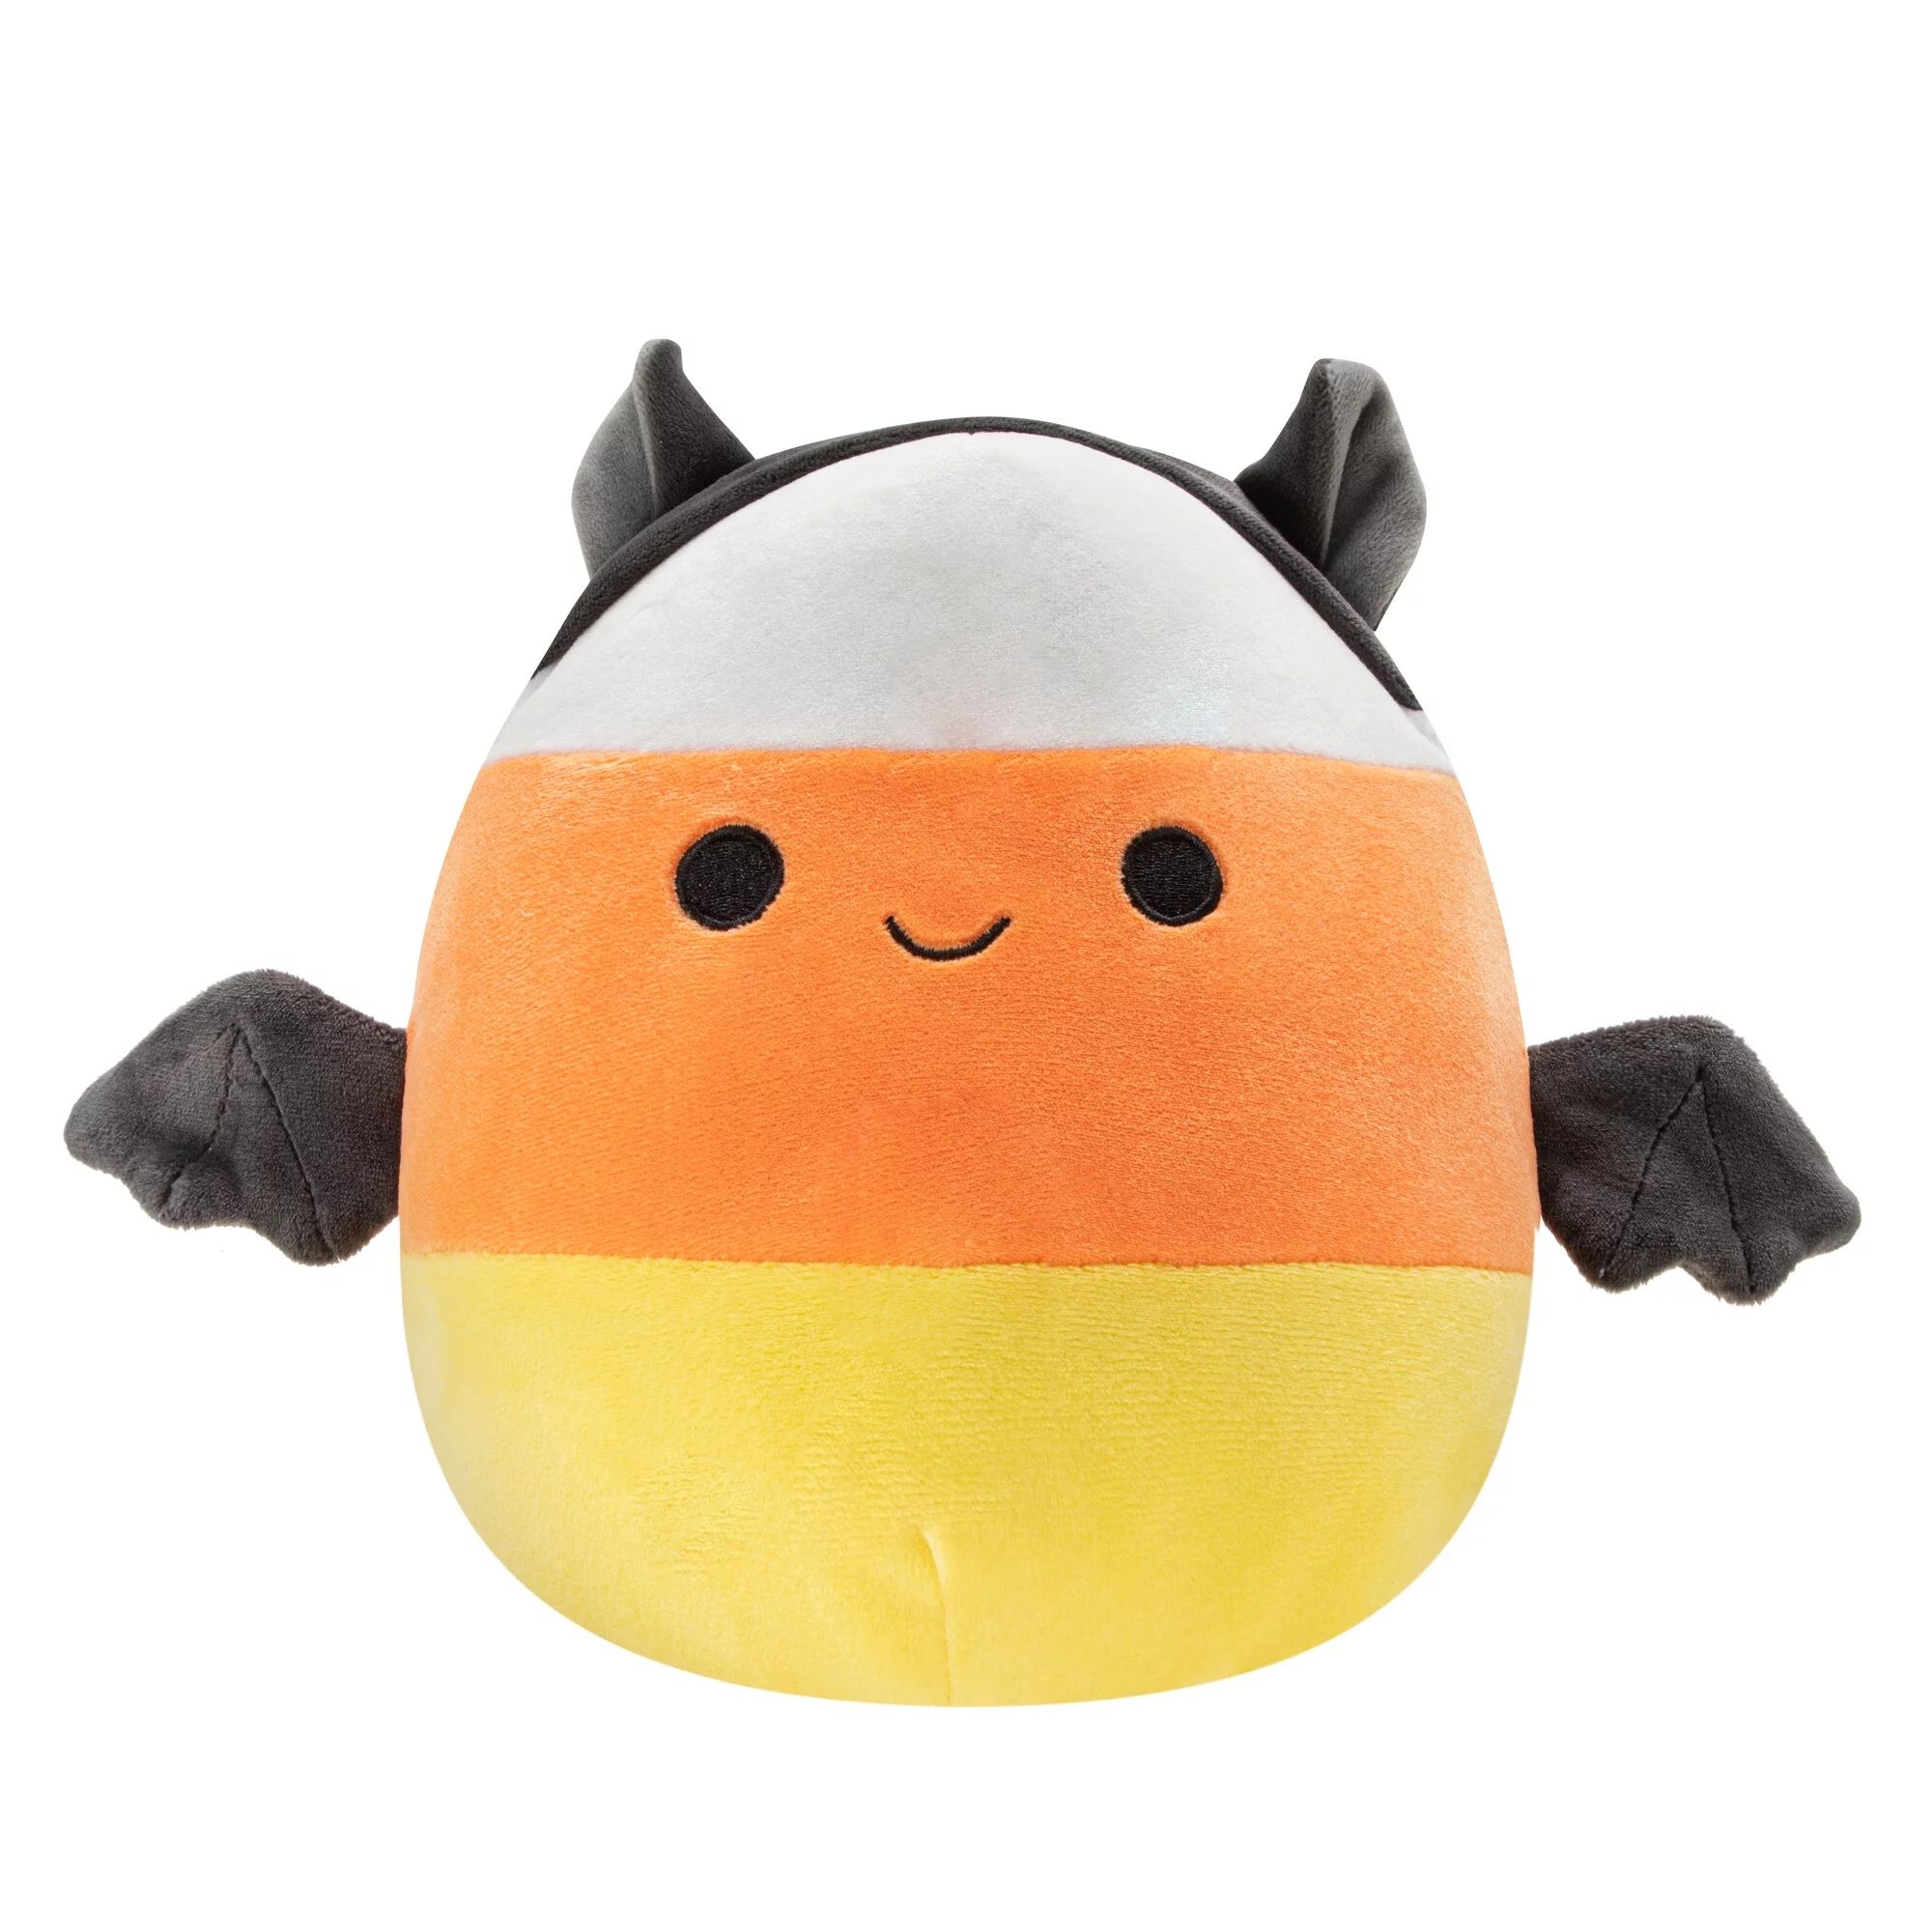 Squishmallows 8" Candy Corn - Delie, The Halloween Stuffed Plush Toy | Walmart (US)